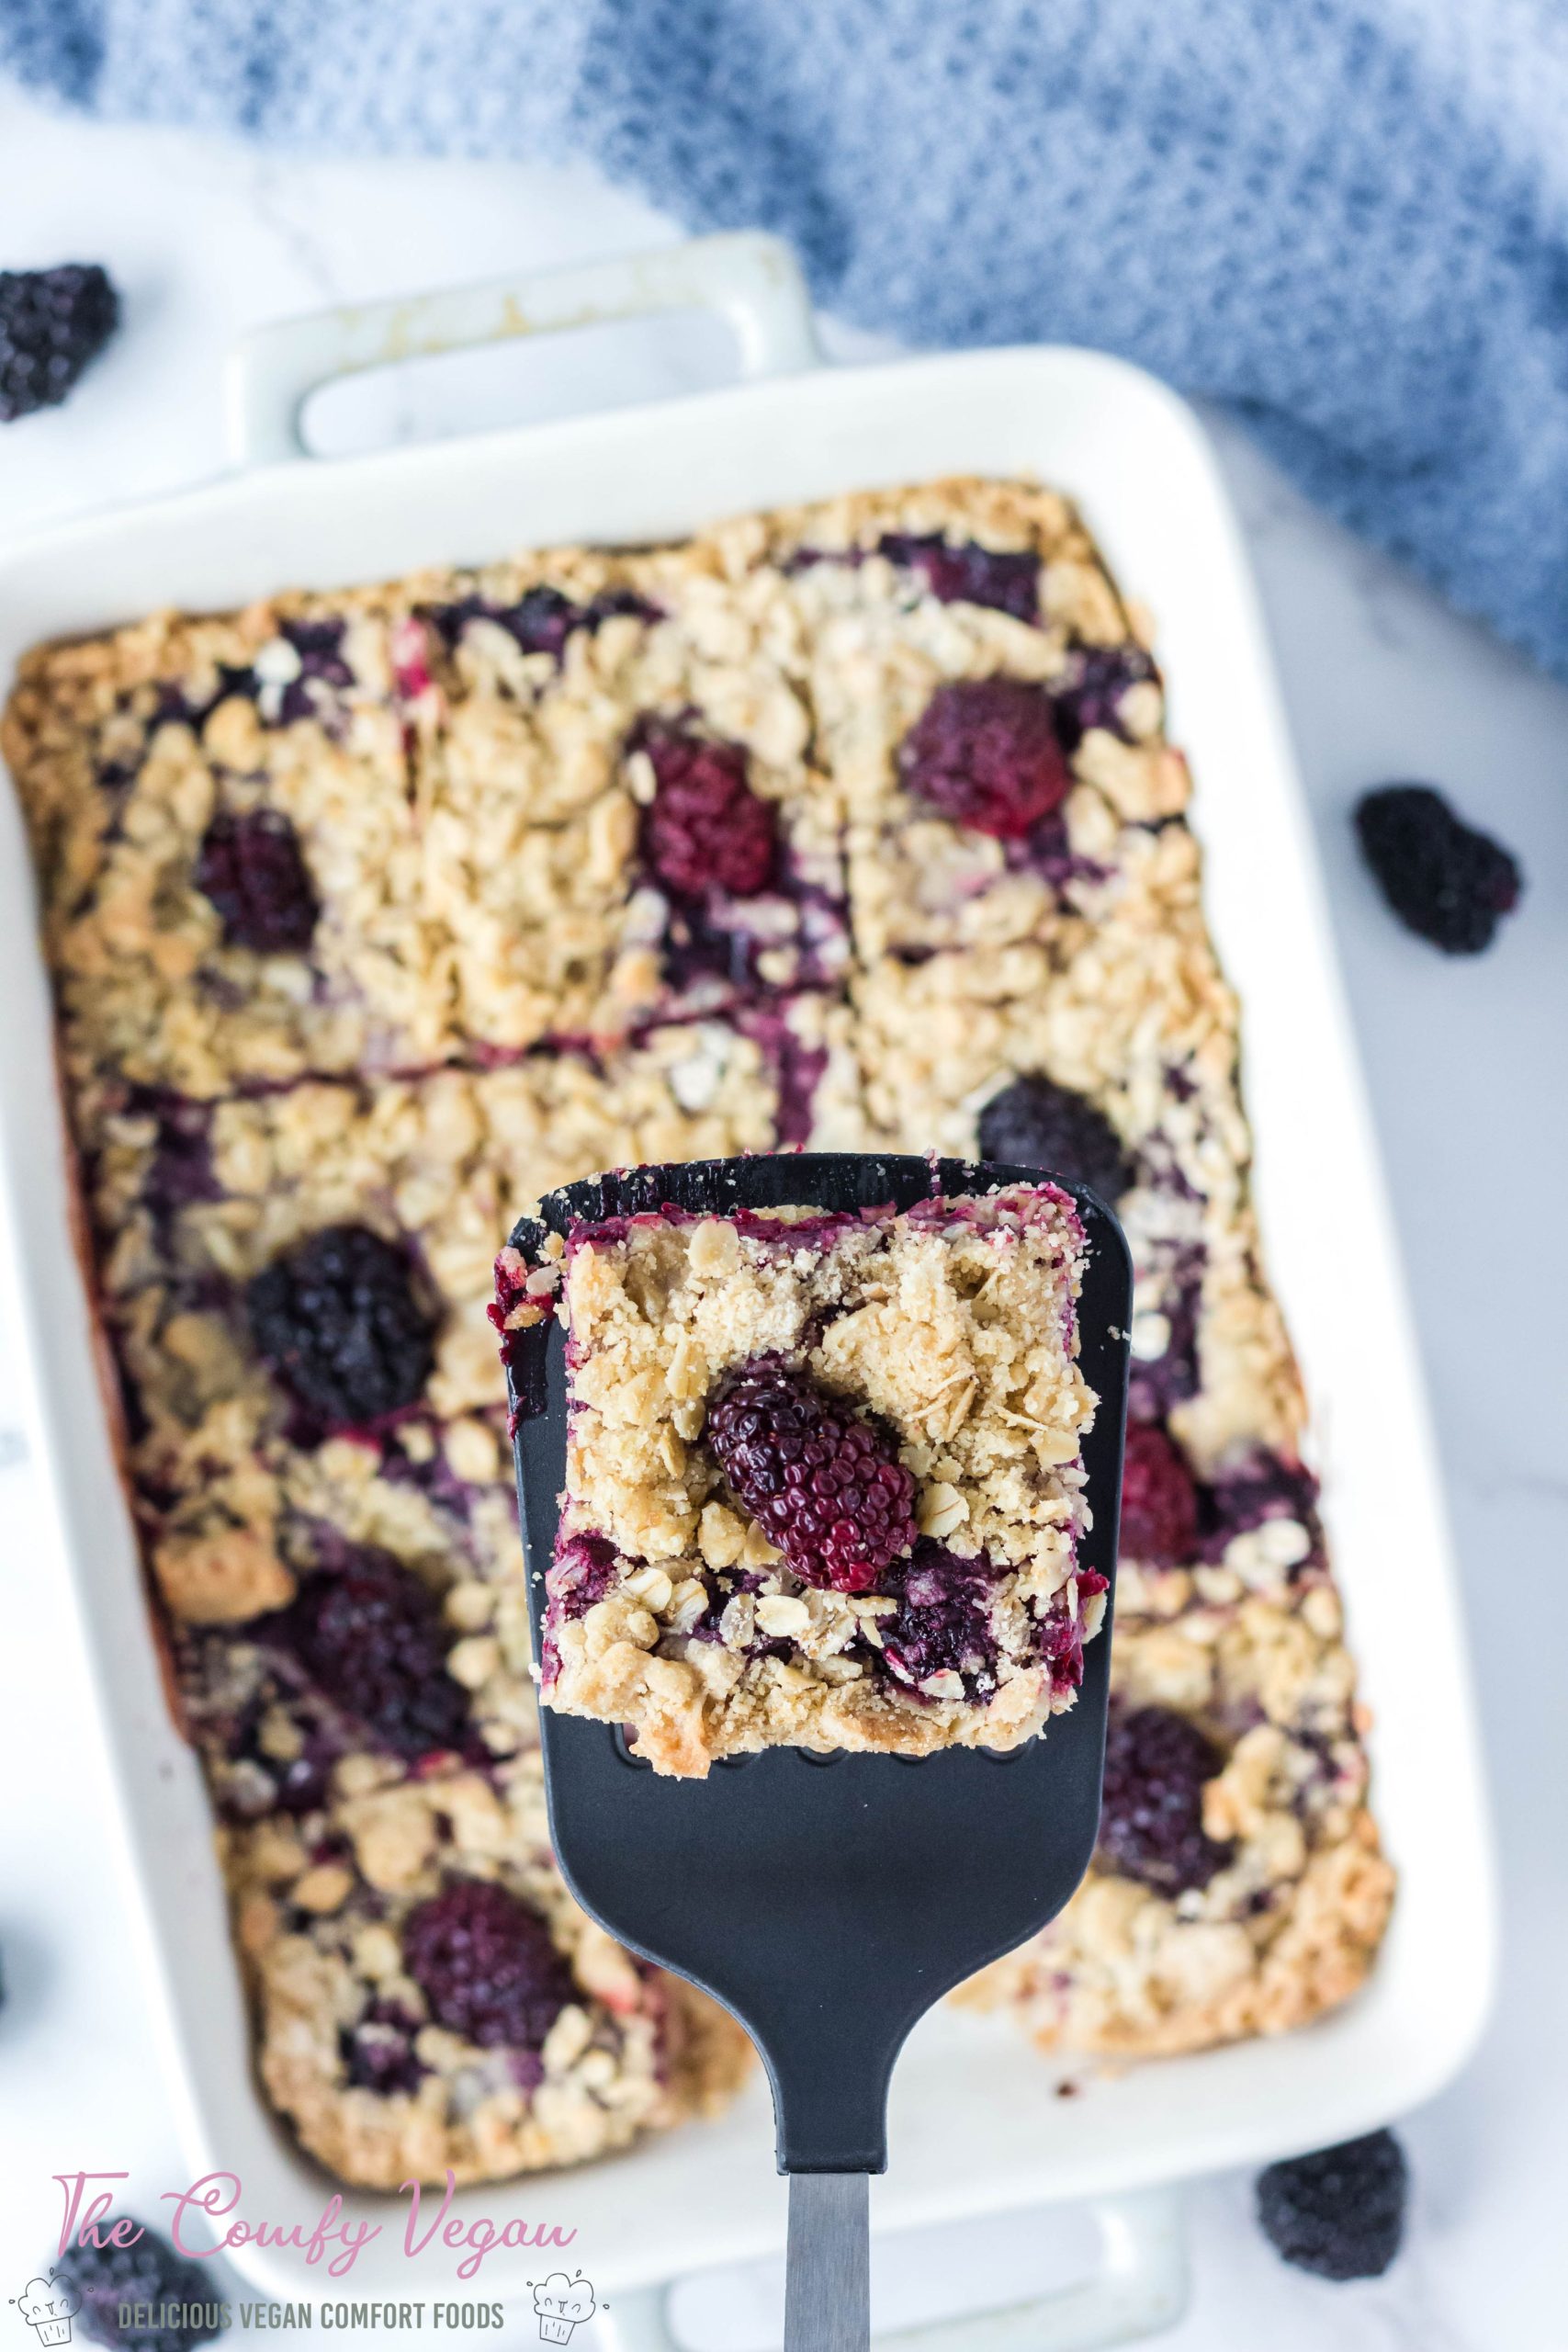 Easy to make and so delicious you're going to love these Vegan Blackberry Oatmeal Bars. Made with 7 ingredients and only 10-minutes of prep these blackberry oat bars are the perfect summertime treat. Fully vegan and can be made gluten-free.